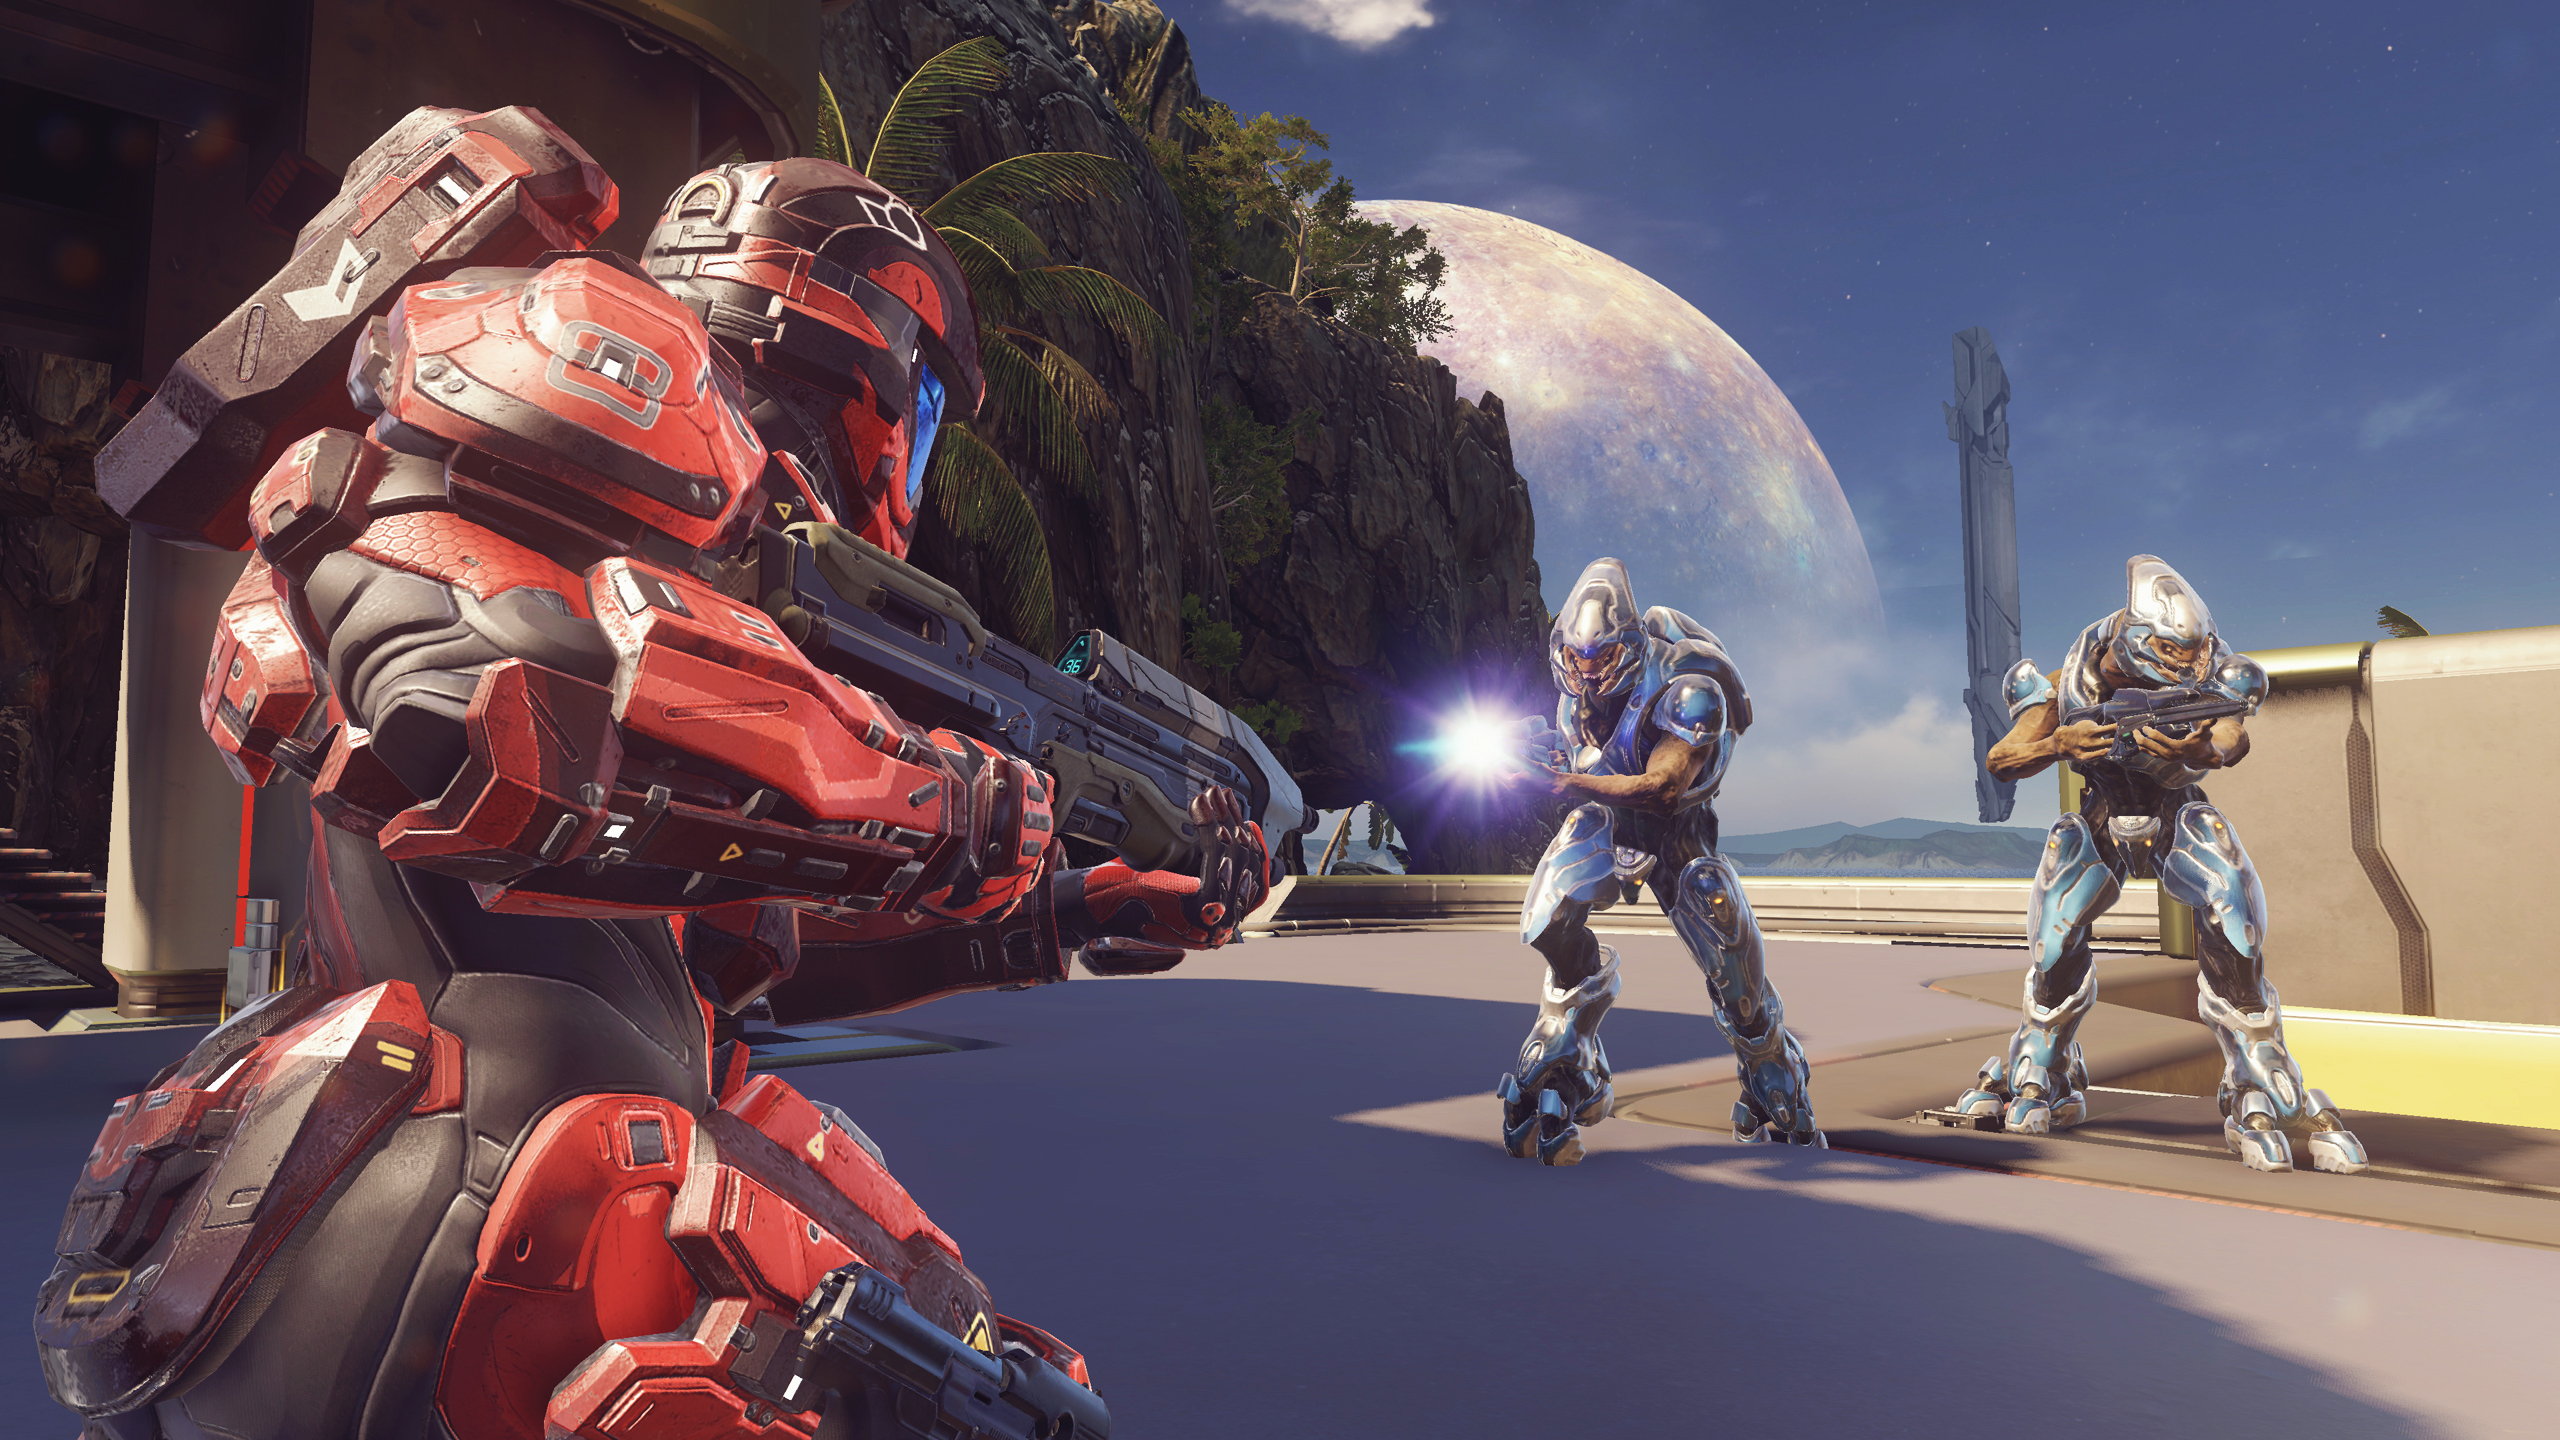 Halo 5: Guardians isn't coming to PC any time soon